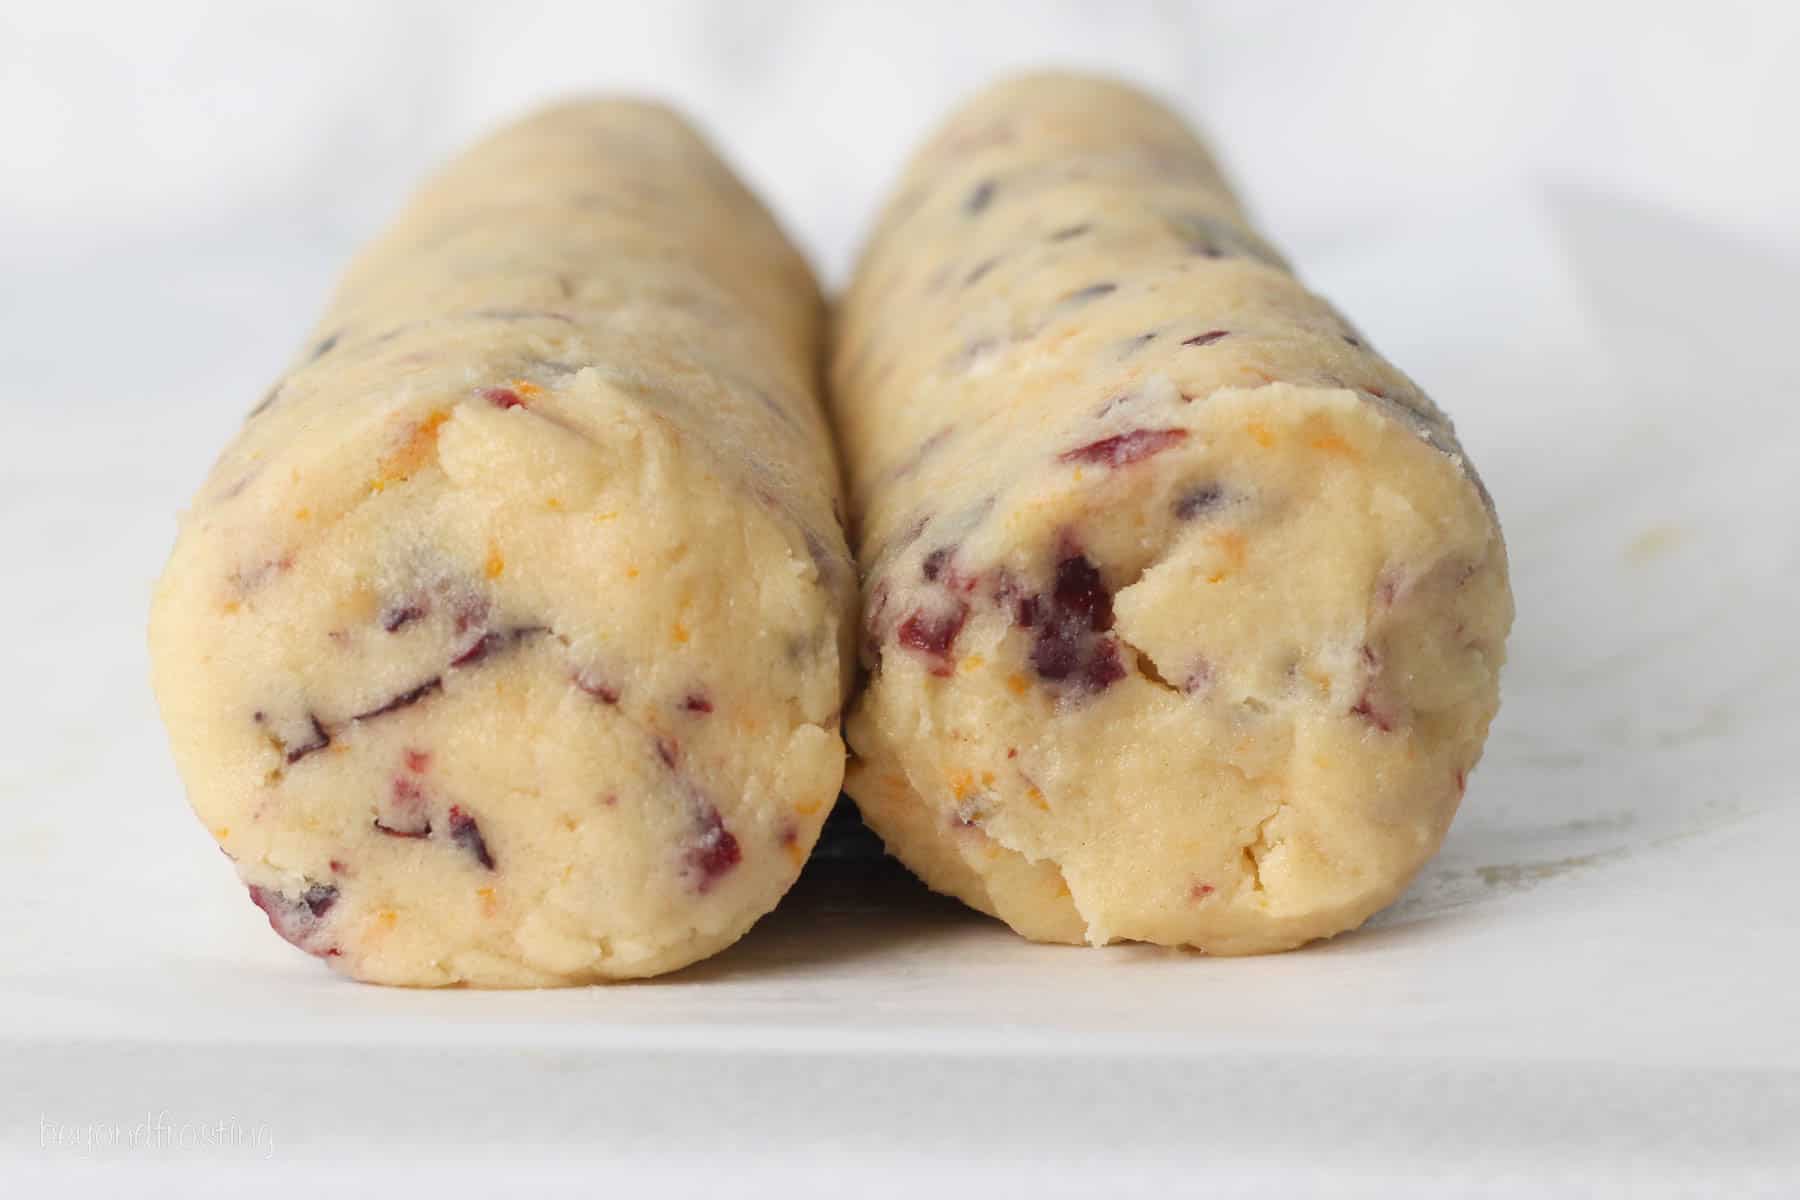 Two logs of cranberry orange shortbread cookie dough resting side-by-side on a countertop.